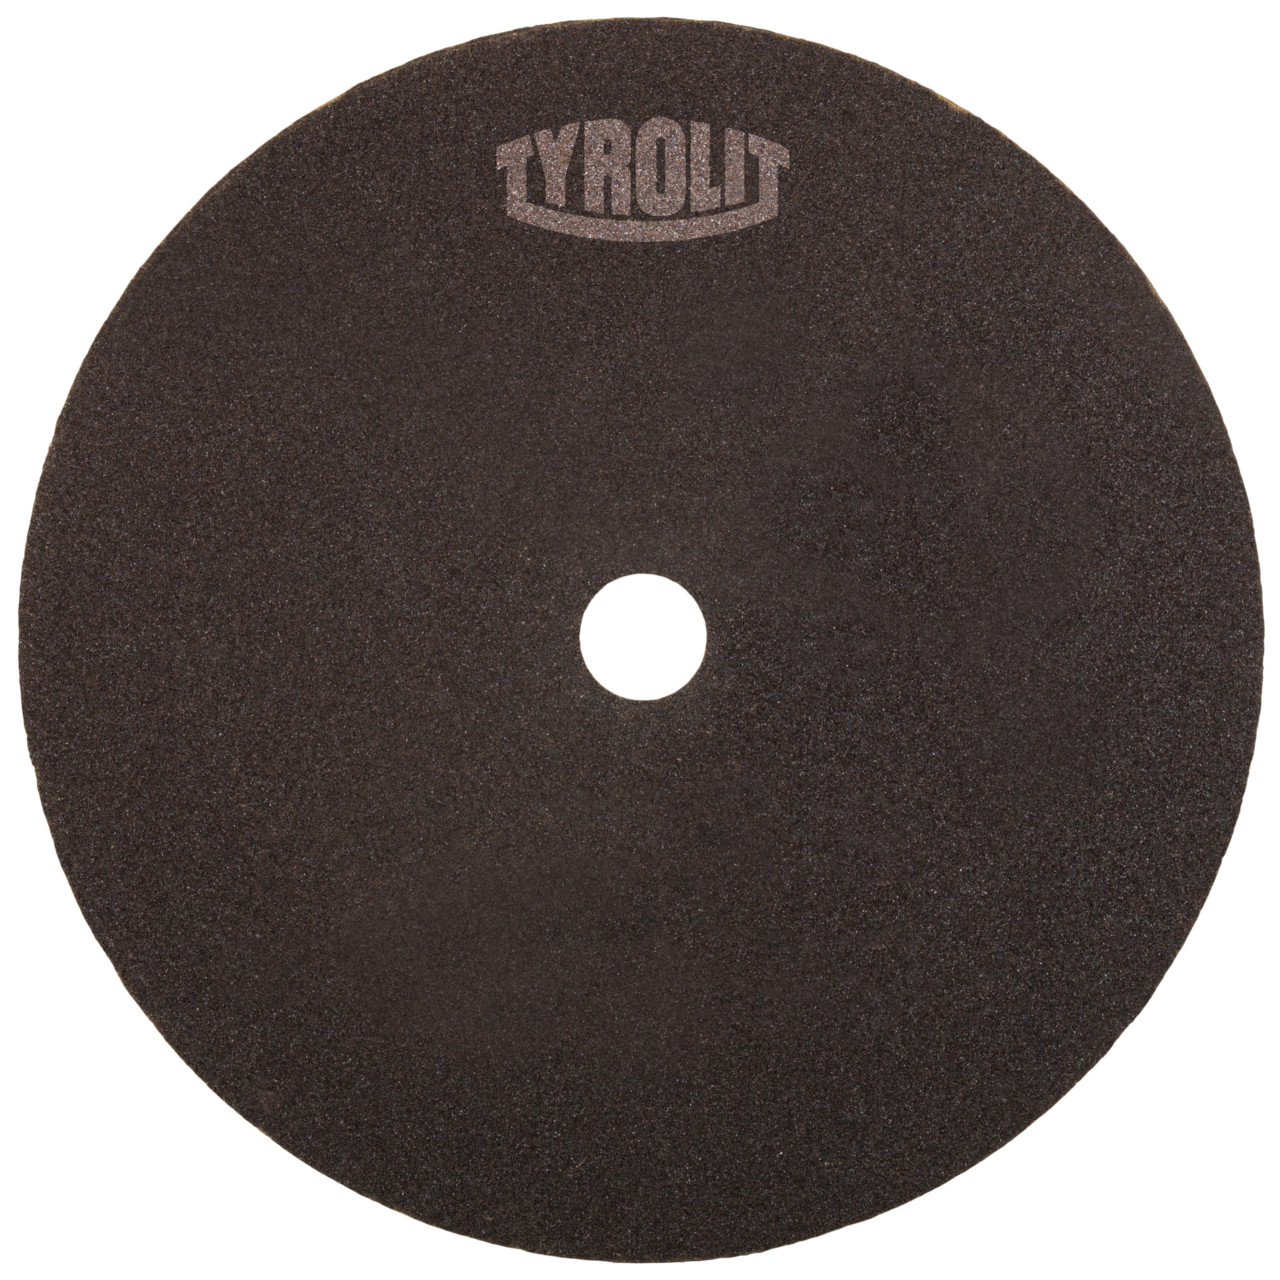 TYROLIT cut-off wheel for cutting and saw sharpening DxDxH 300x2x32 For steel and HSS, shape: 41N - straight version (non-woven cut-off wheel), Art. 60572